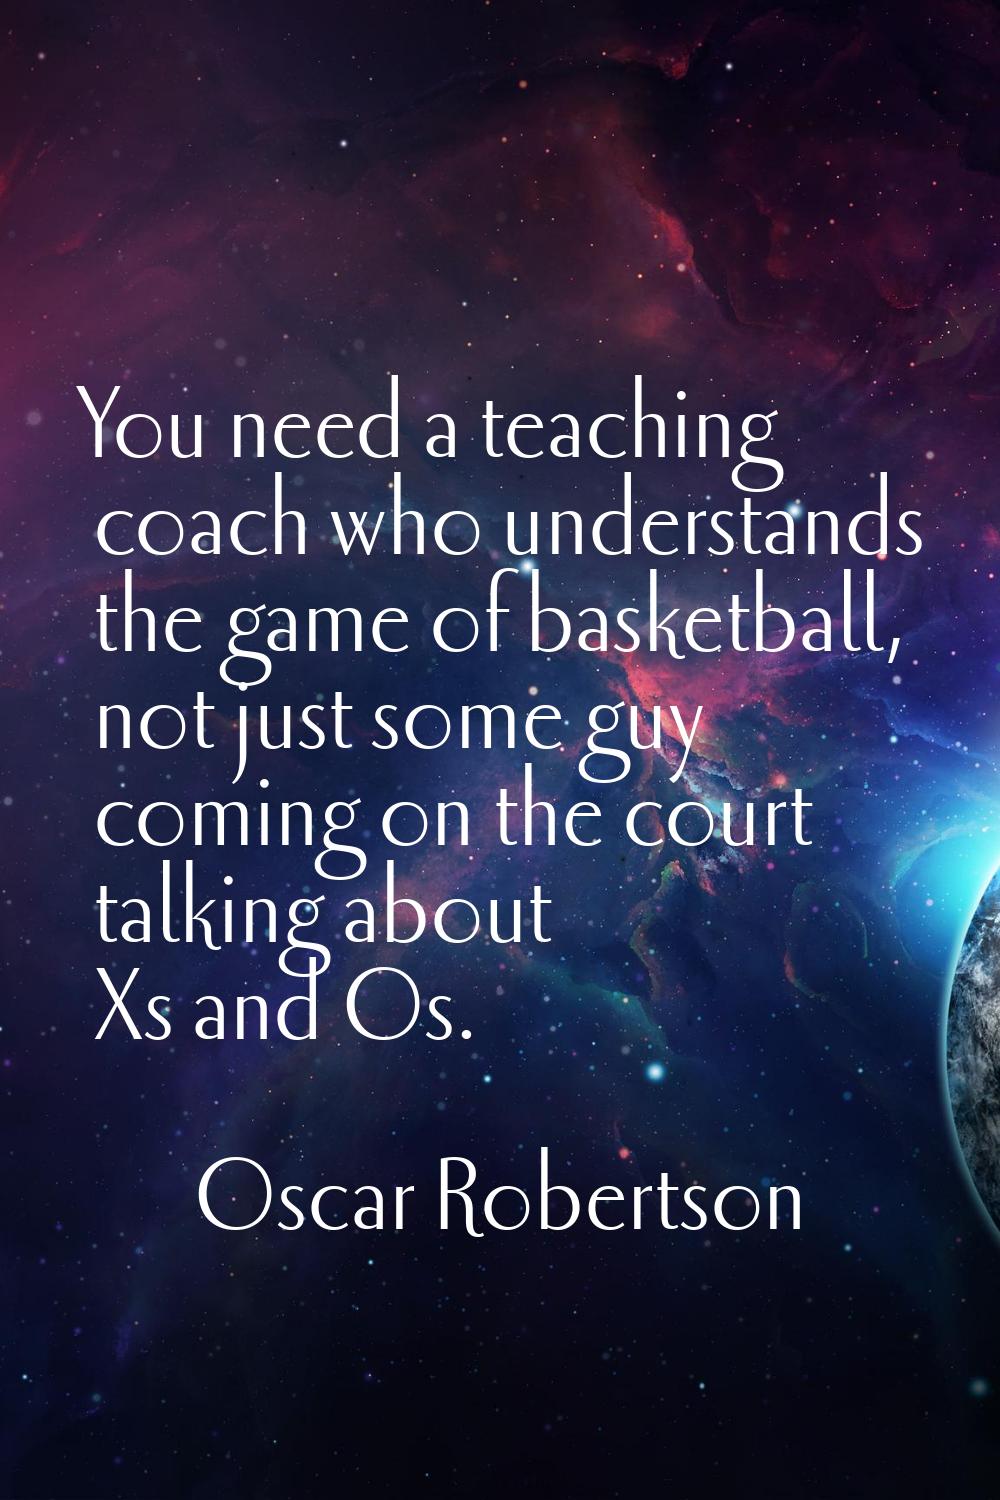 You need a teaching coach who understands the game of basketball, not just some guy coming on the c